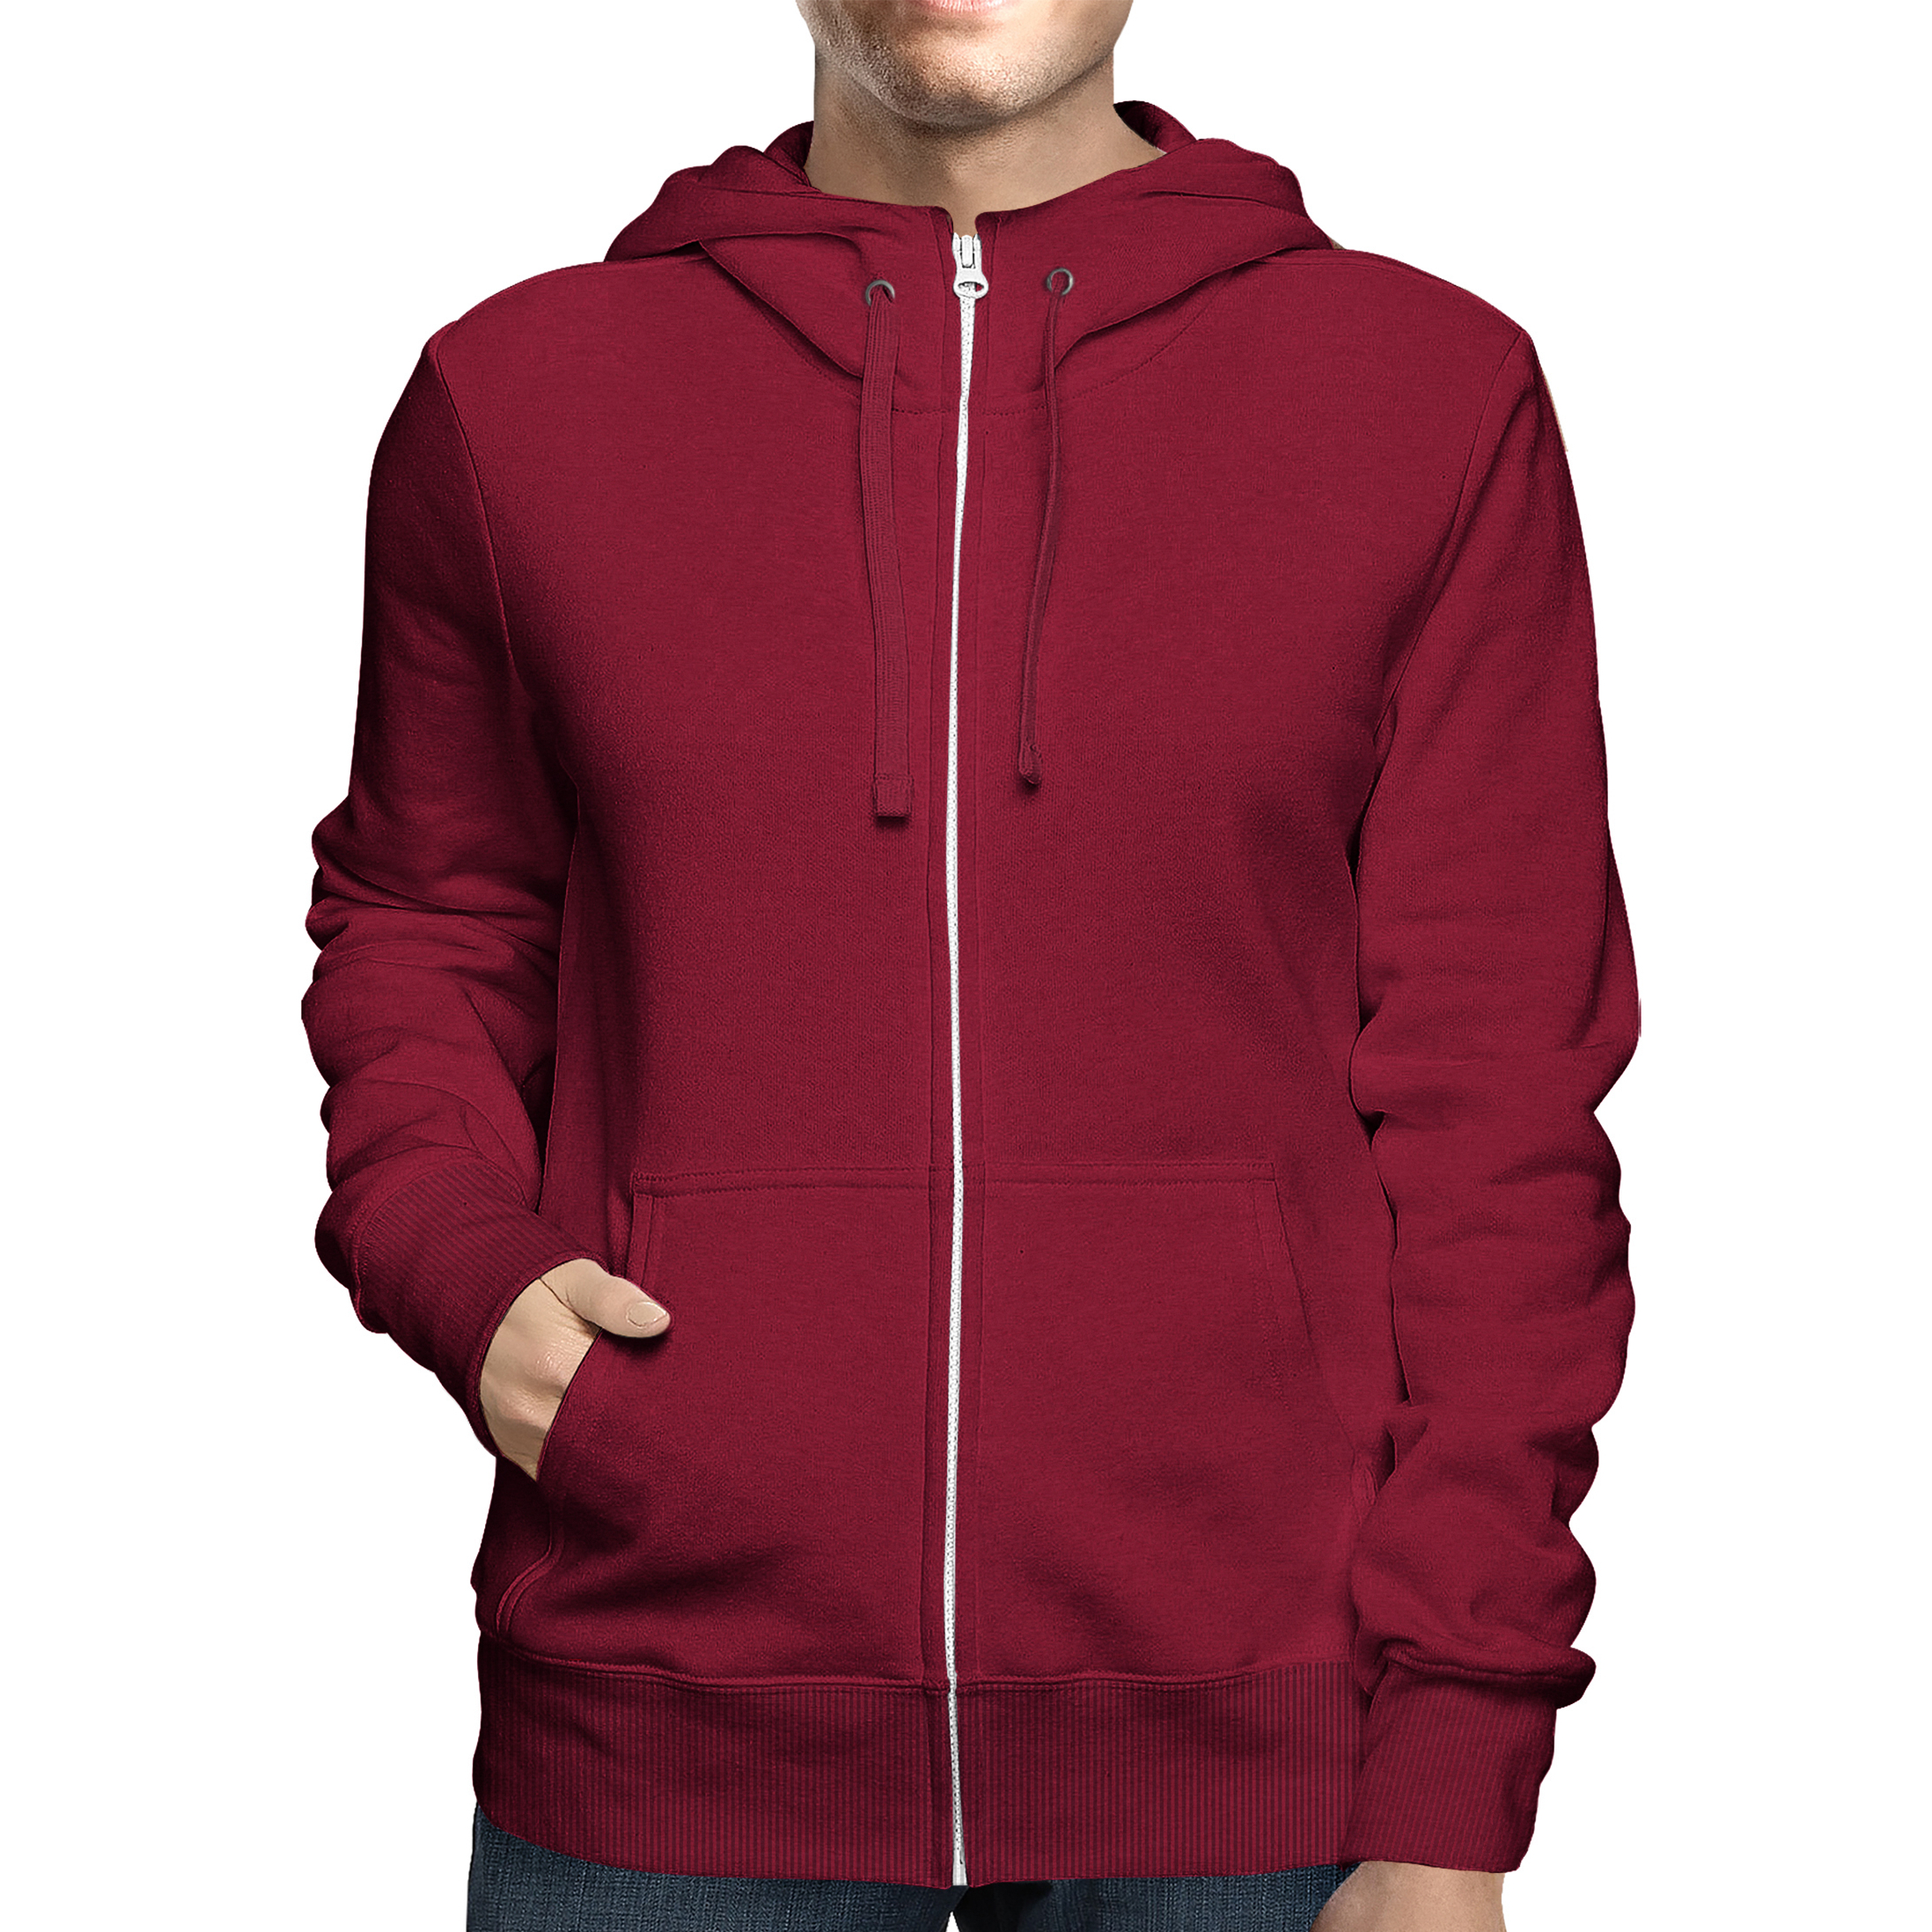 2-Pack: Men's Full Zip Up Fleece-Lined Hoodie Sweatshirt (Big & Tall Size Available) - Burgundy, Large